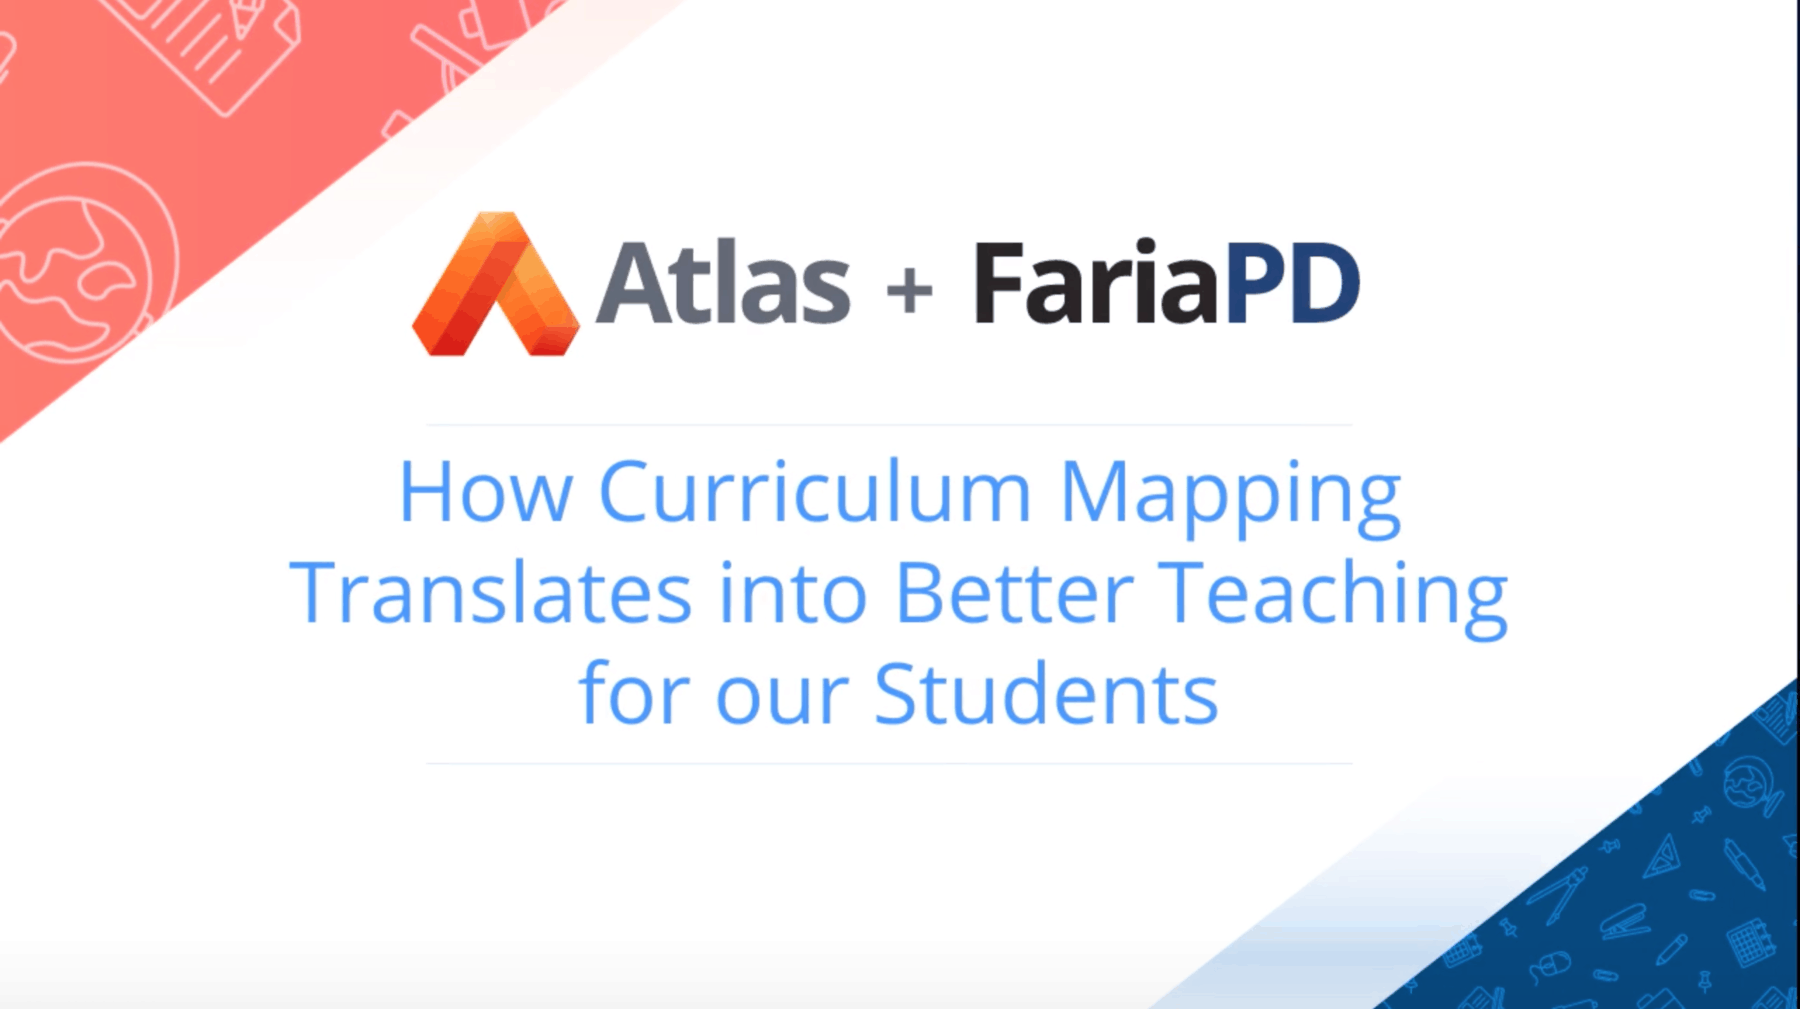 How Curriculum Mapping Translates into Better Teaching for our Students